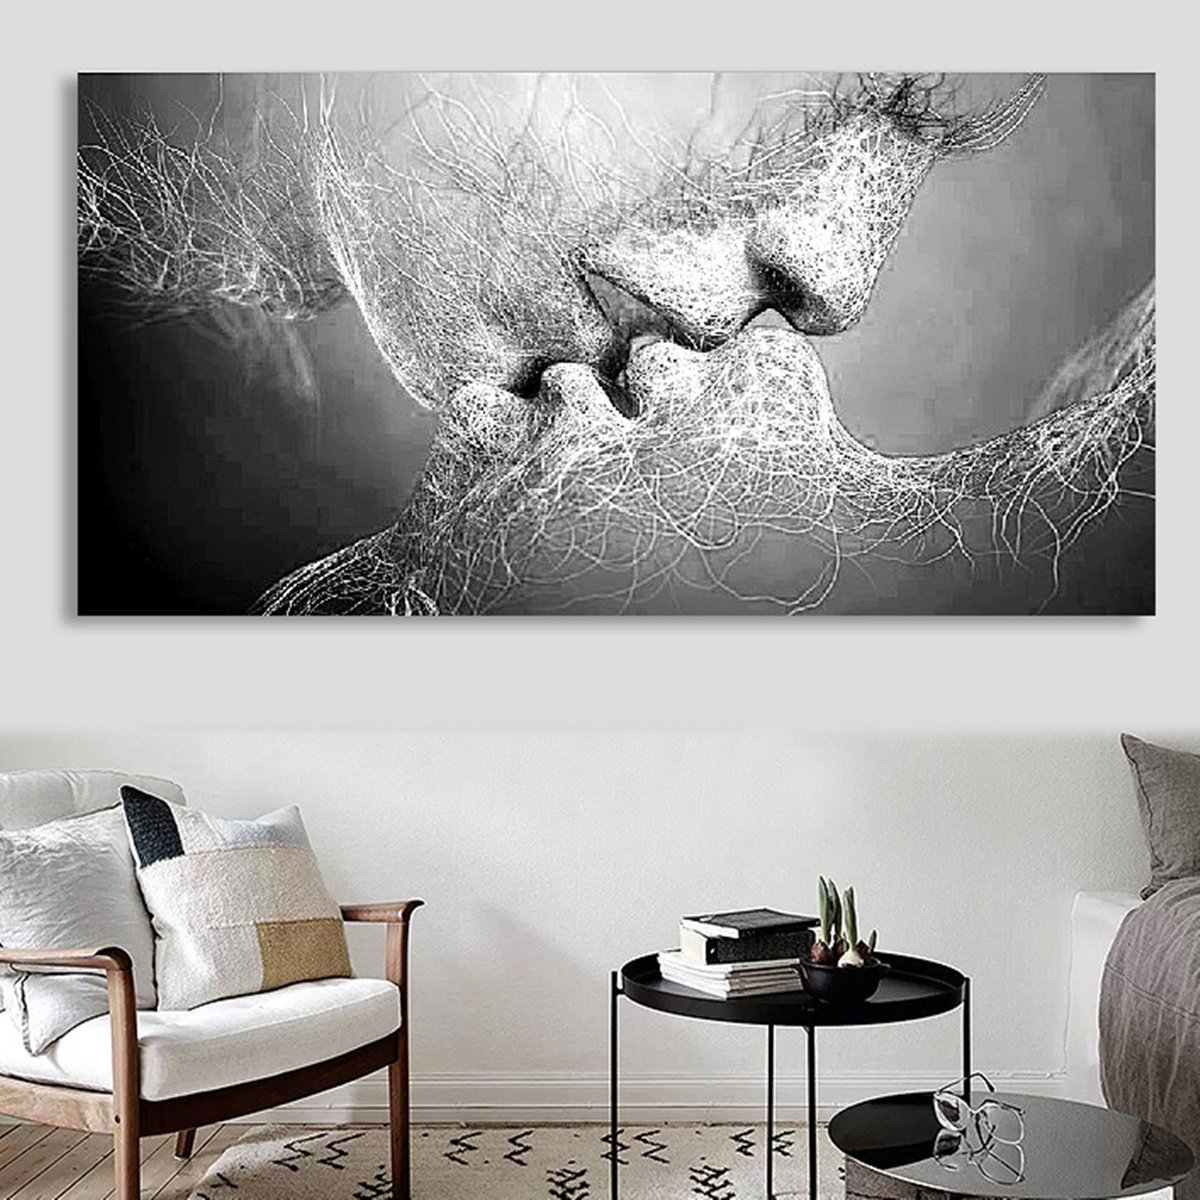 

Kiss Abstract No Frame Canvas Painting Grey Home Bedroom Wall Art Decor